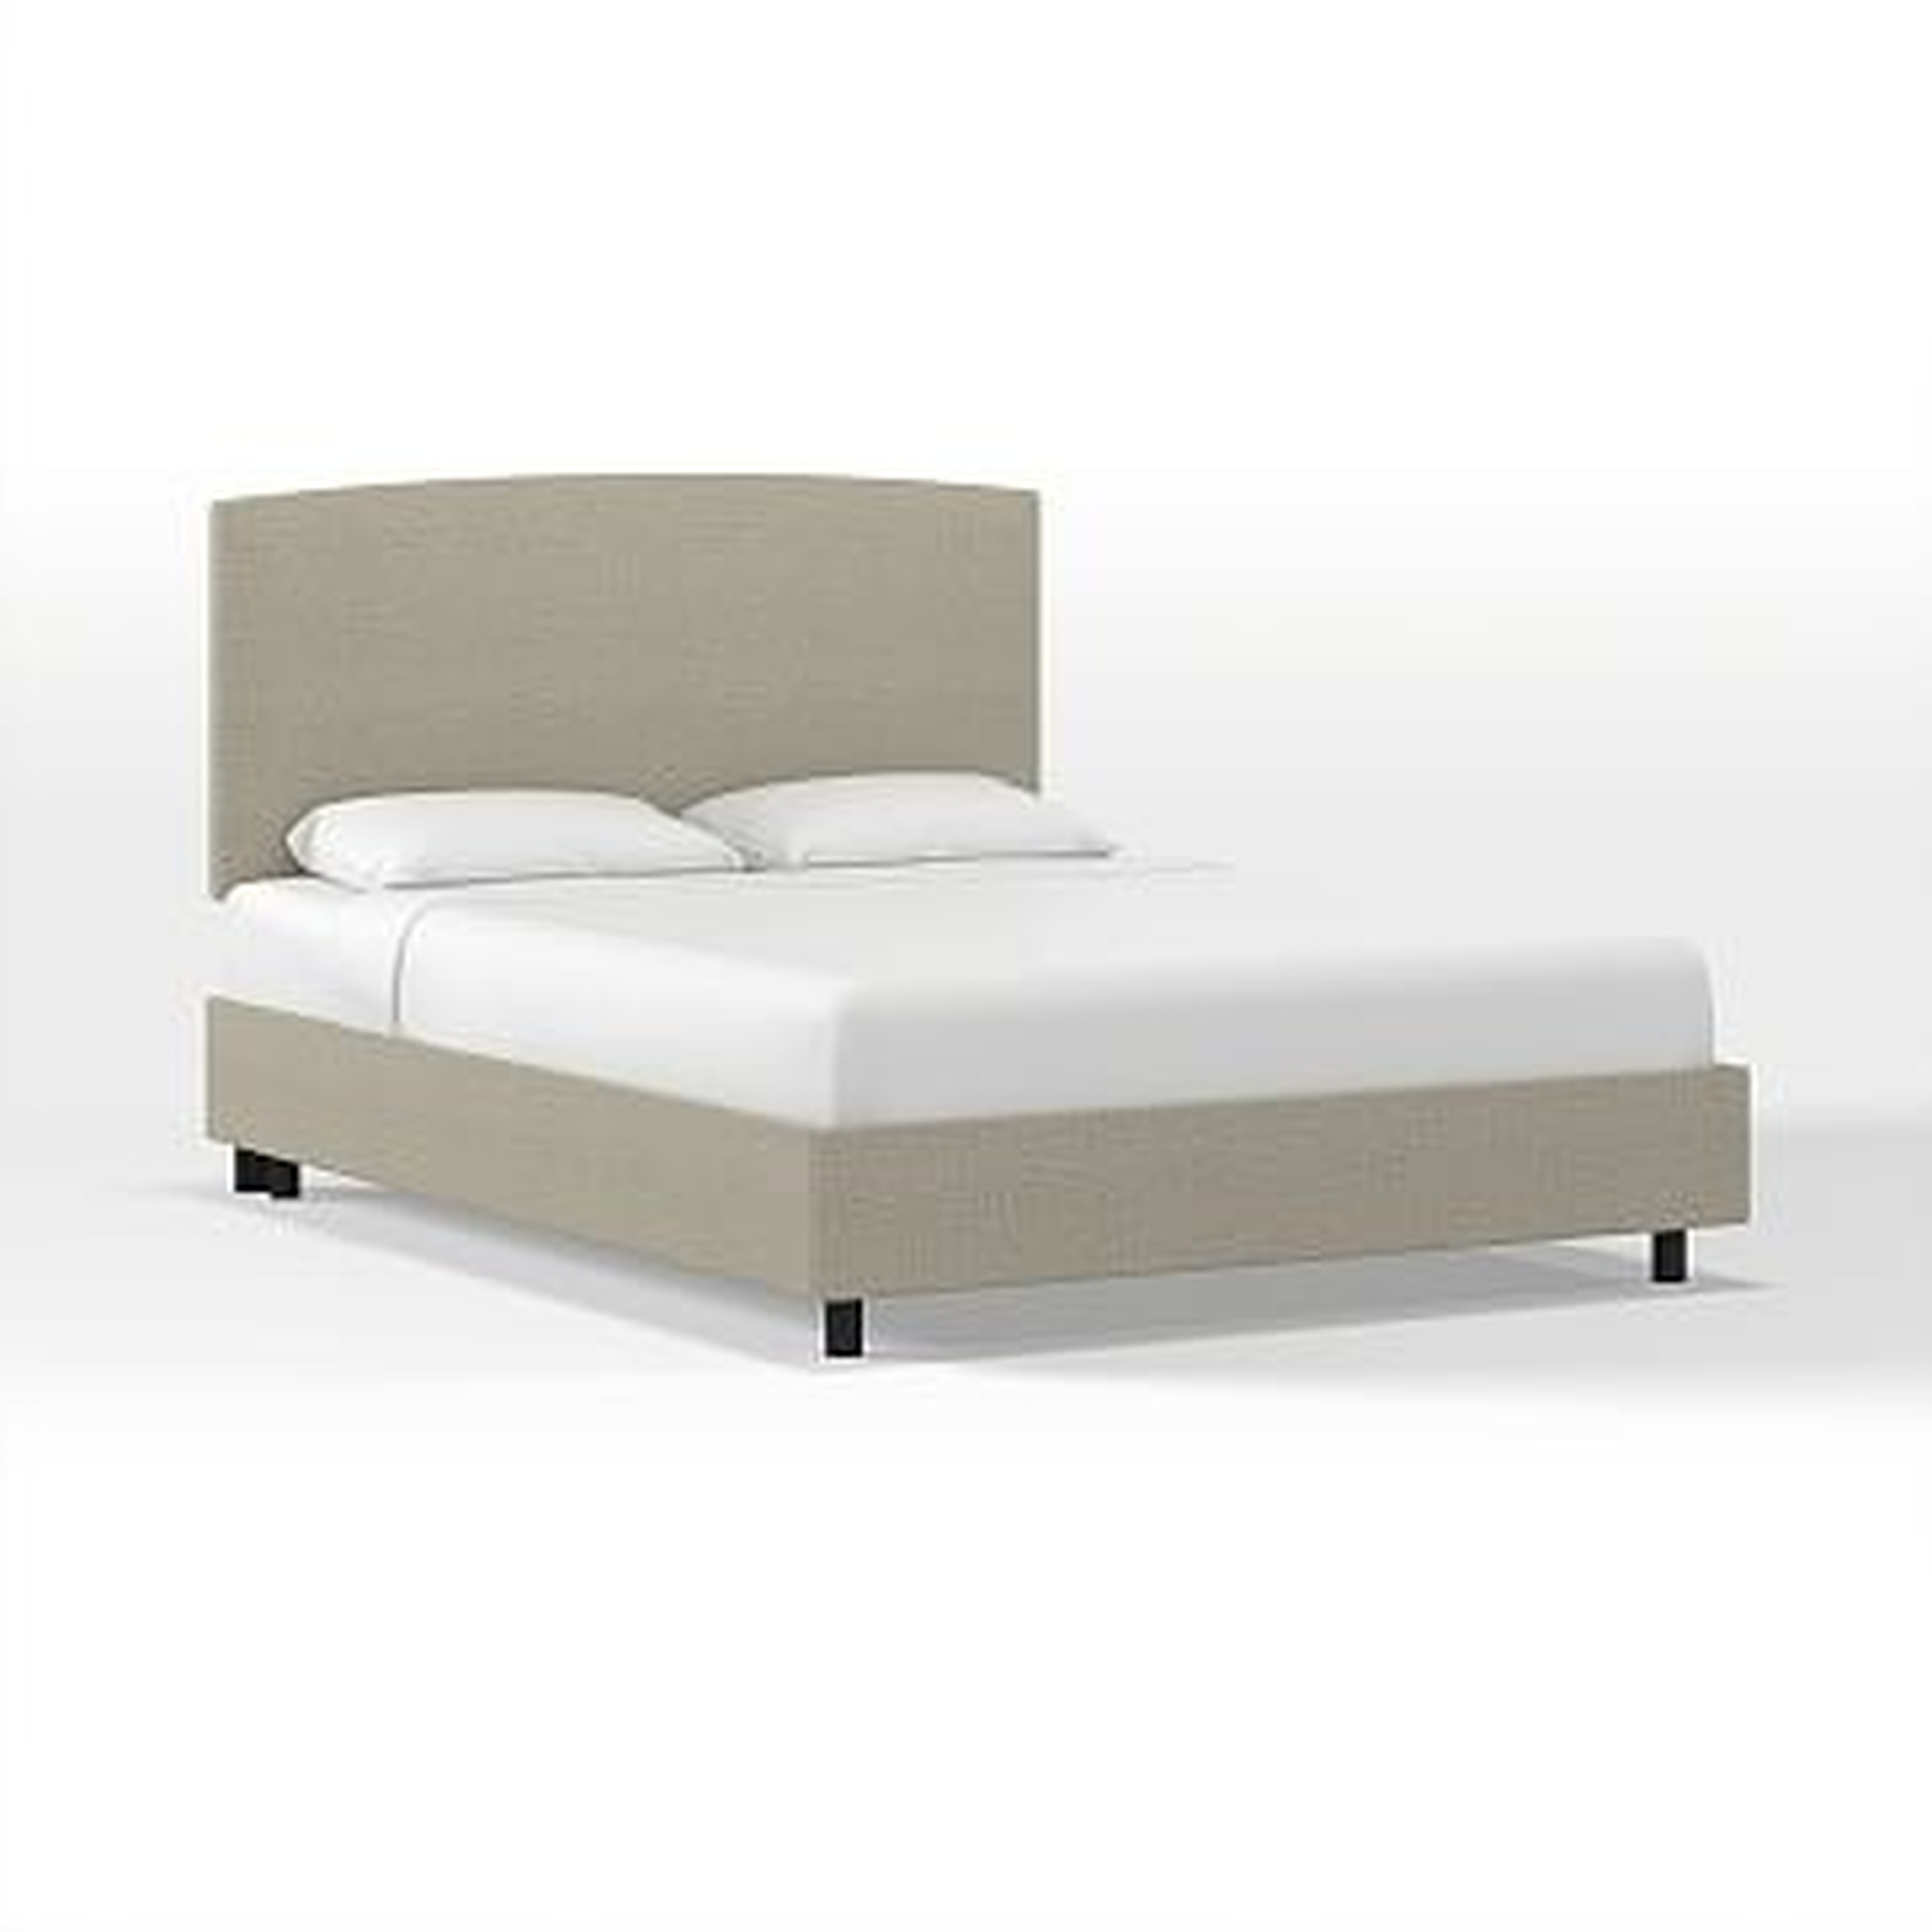 Skyline Upholstered Bed, Queen, Twill, Stone - West Elm